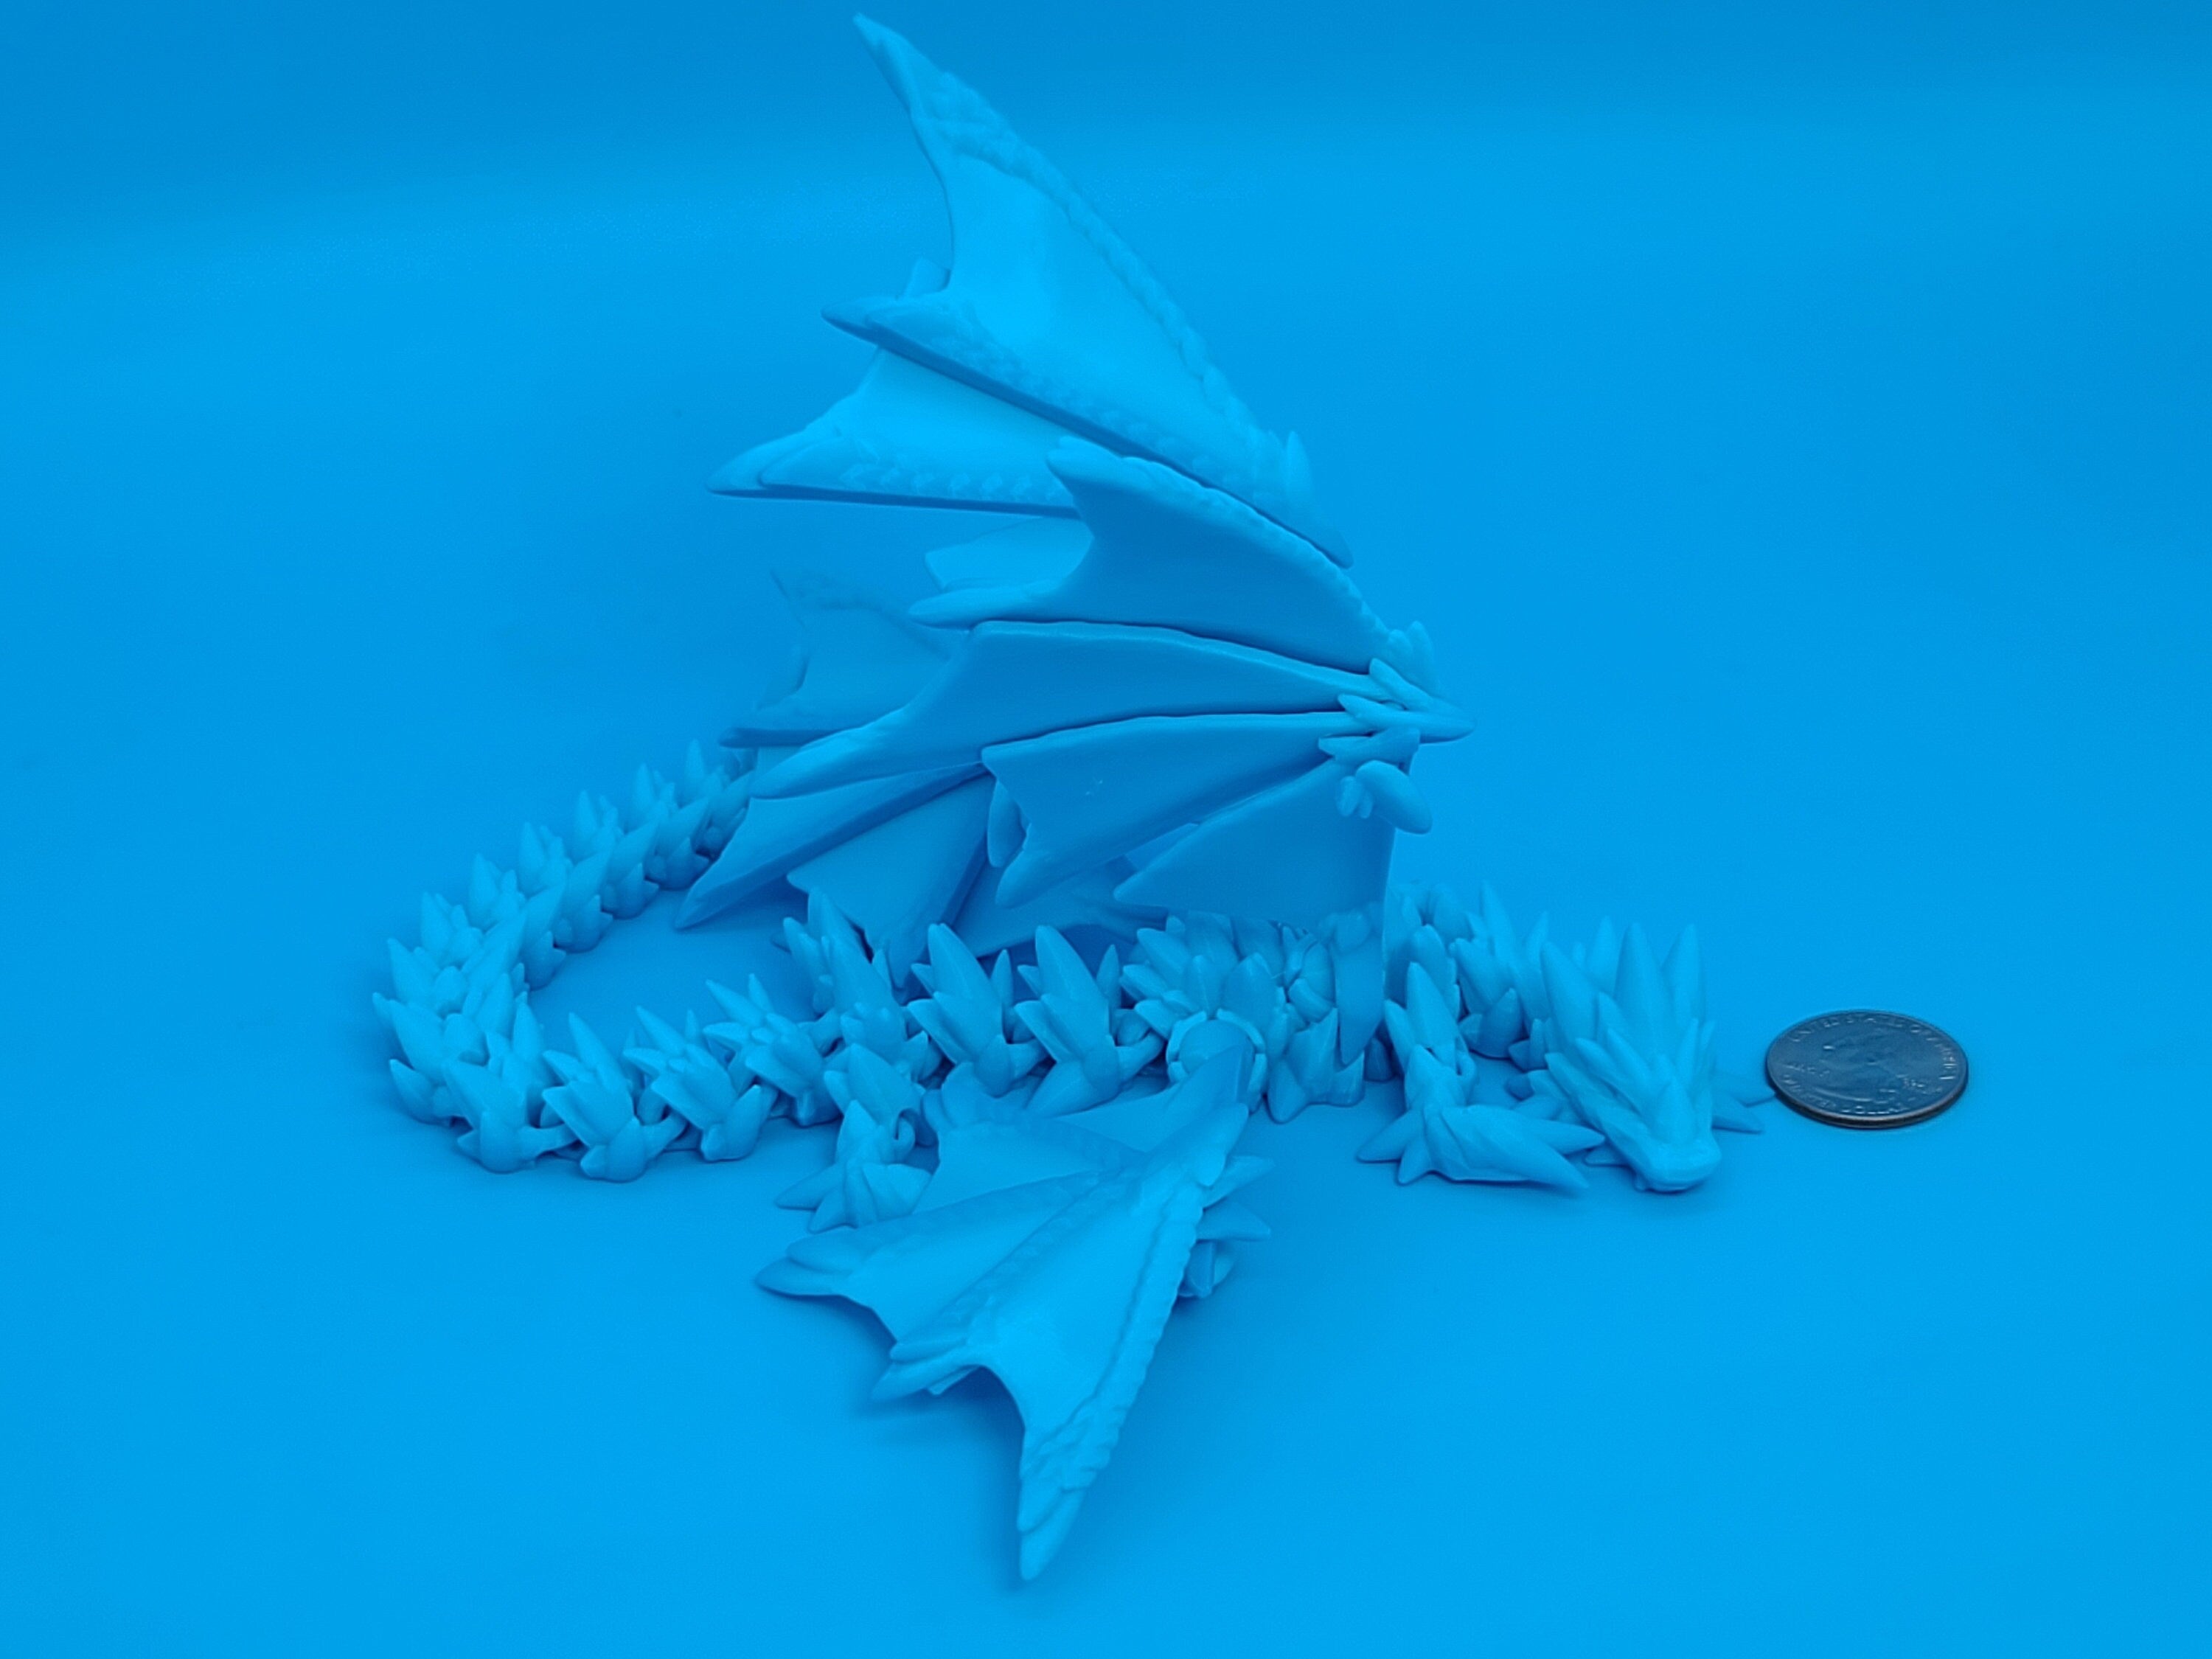 Spike Dragon with wings | 3D Printed Articulating Dragon 11 in.